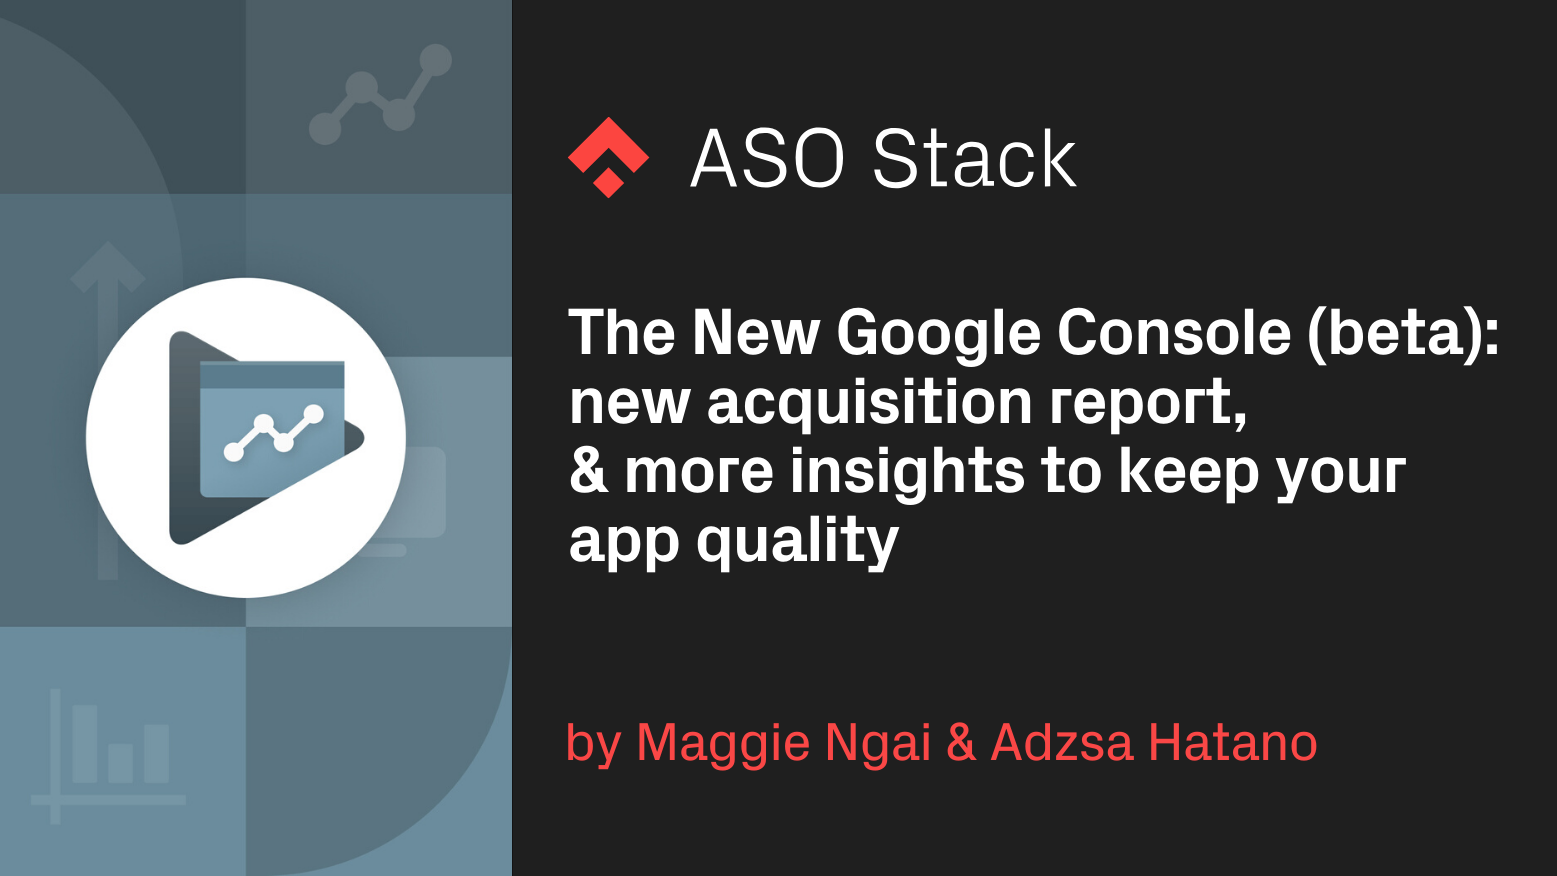 The New Google Console (Beta): New Acquisition Report & Insights to Keep Your App Quality